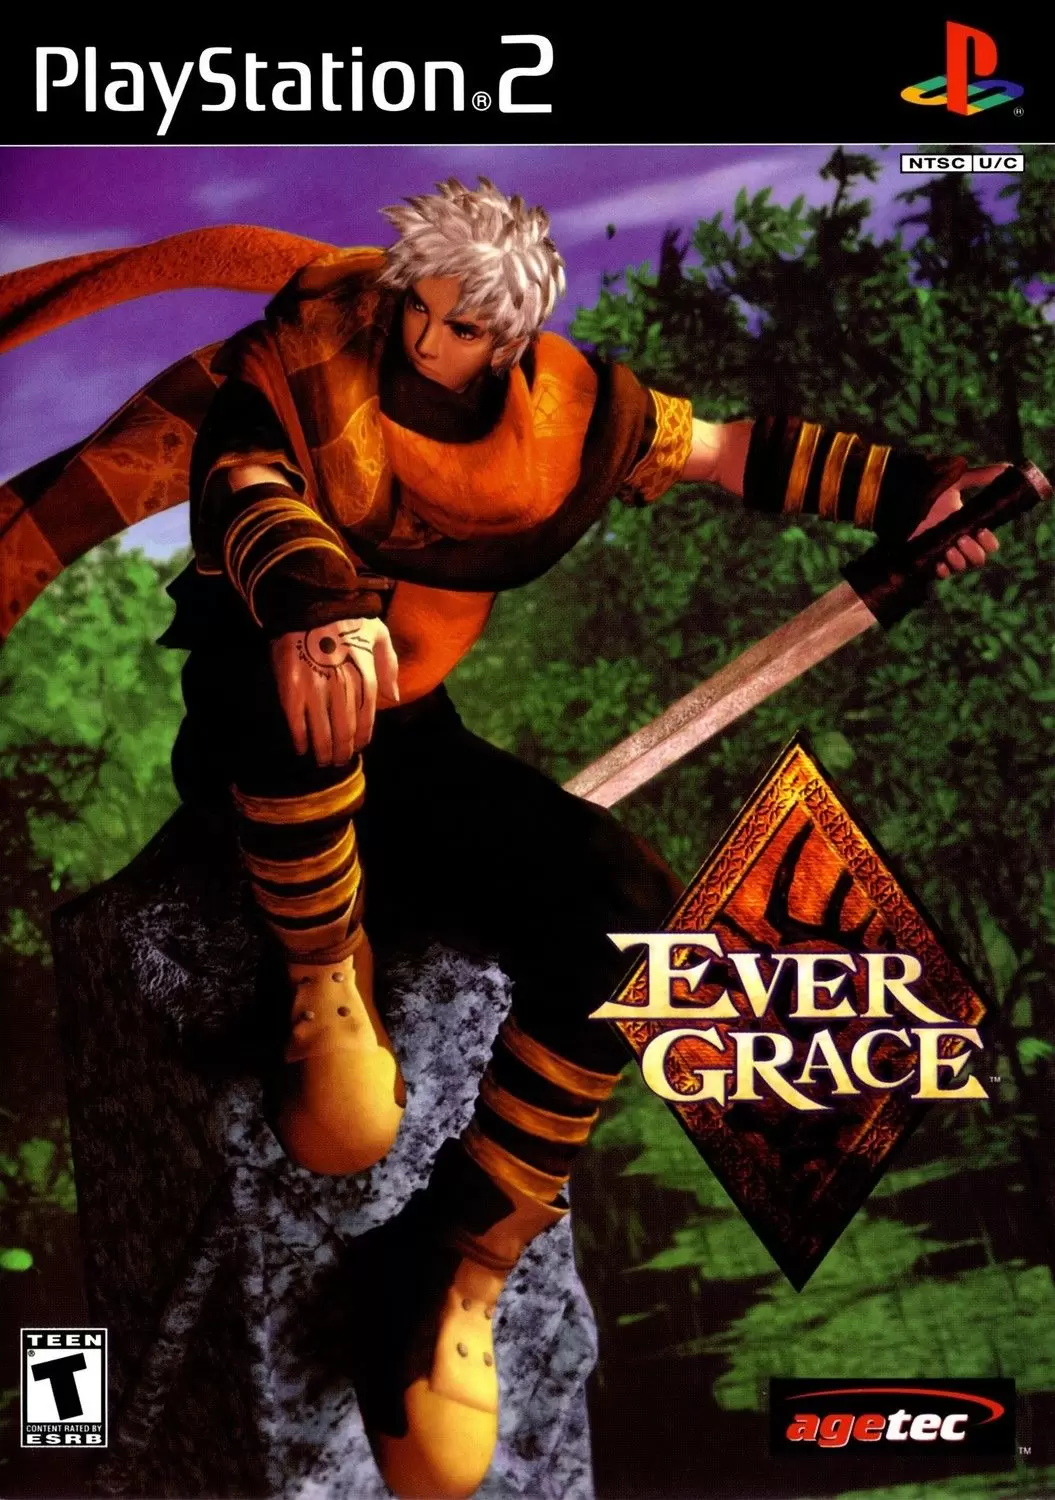 PS2 Games - EverGrace